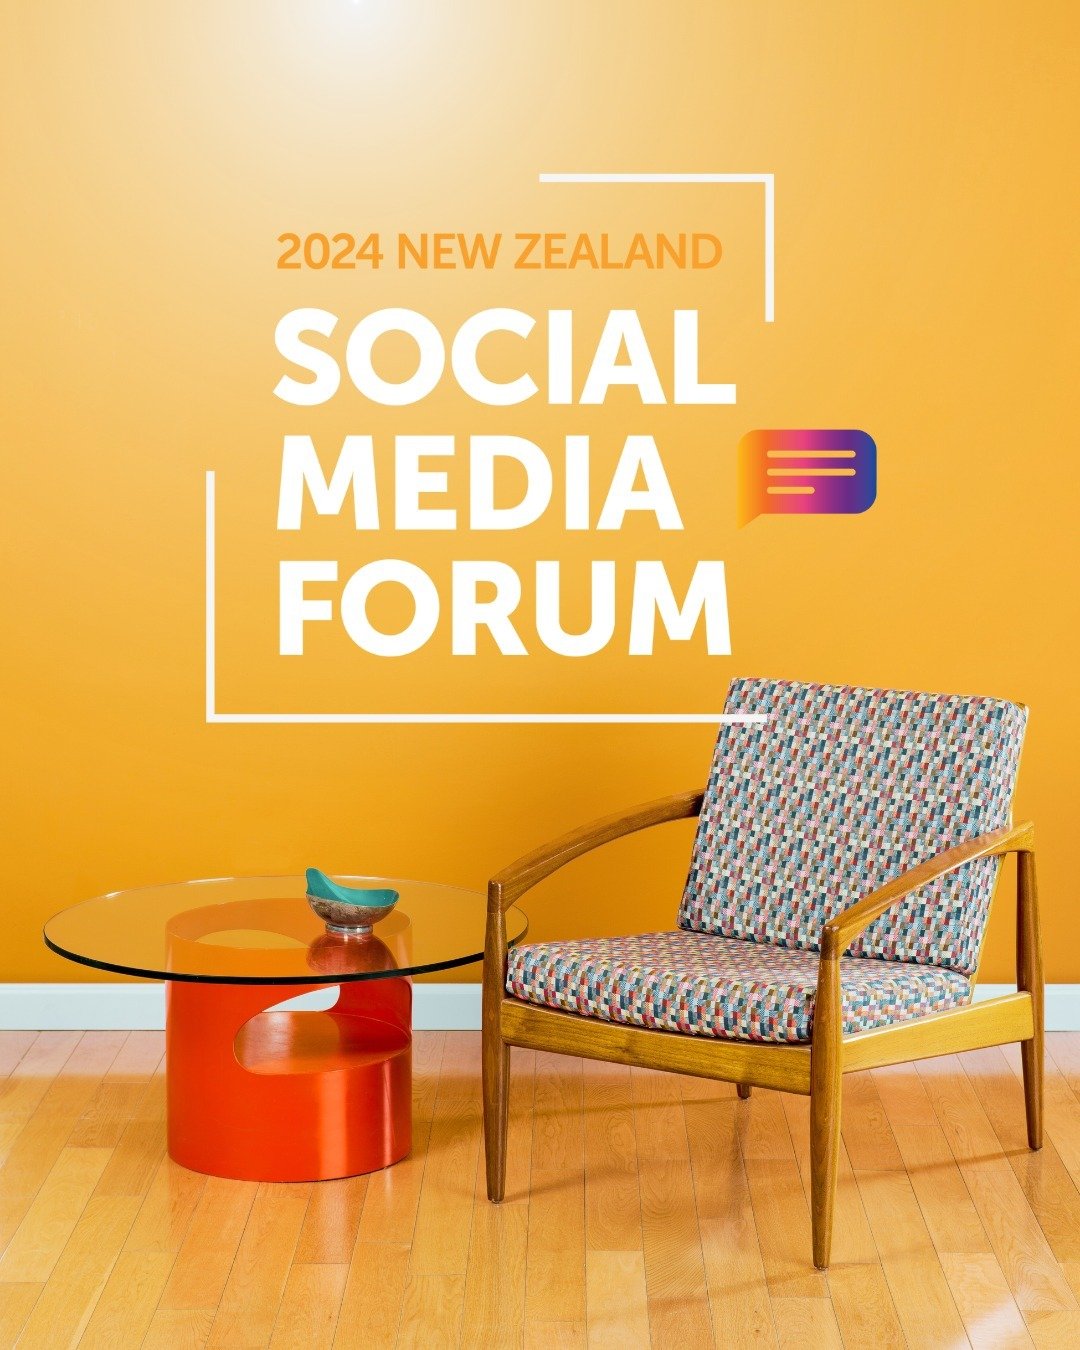 We're excited to be speaking at the NZ Social Media Forum on June 25th. 🙌 
Chris and Rosie will be running a session on 'Going Back to Propel Forward: Mastering Creative Content in NZ' 

If you're after tickets, let us know and we can chuck a cheeky